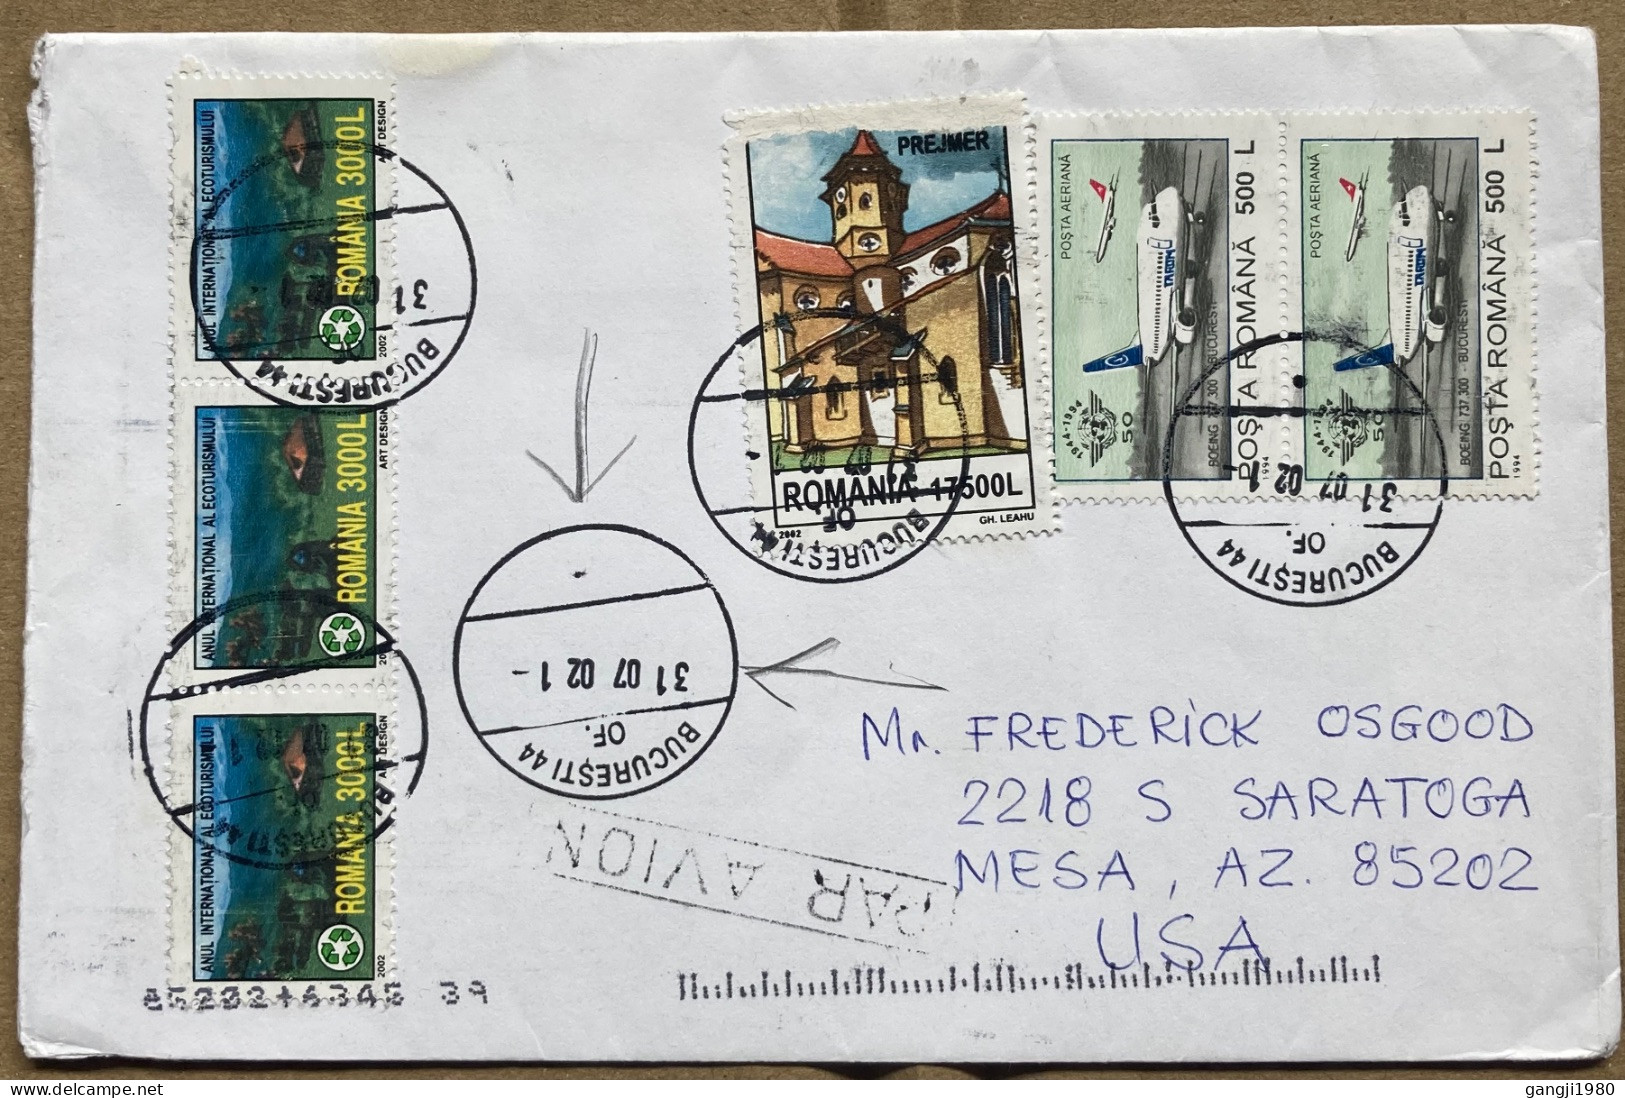 ROMANIA 2002, COVER USED TO USA, 6 STAMP, ECO-TOURISM, PREJMER BUILDING, HERITAGE, BOEING AEROPLANE, BUCHAREST CITY CANC - Lettres & Documents